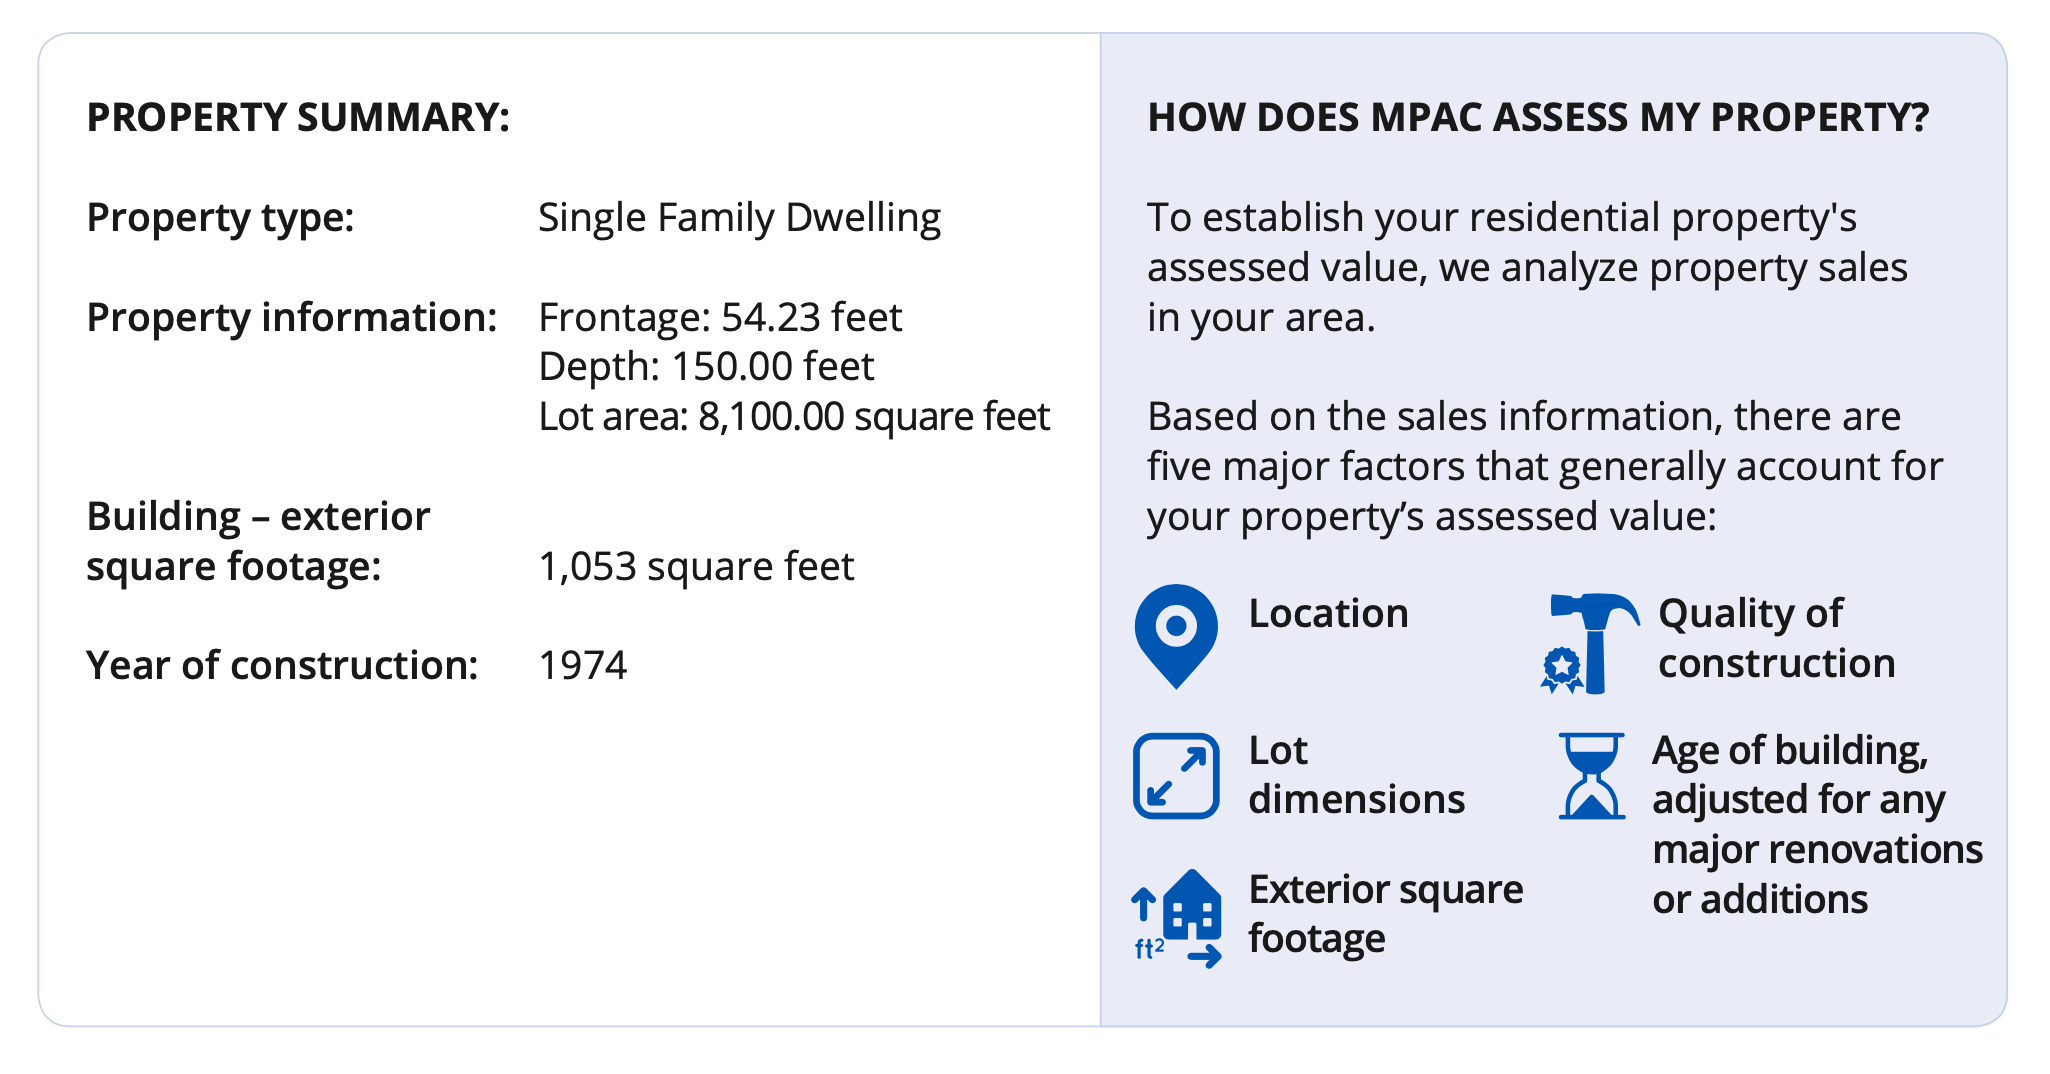 Your assessment shows some details of your property, including type, dimensions, floorspace & year of construction.